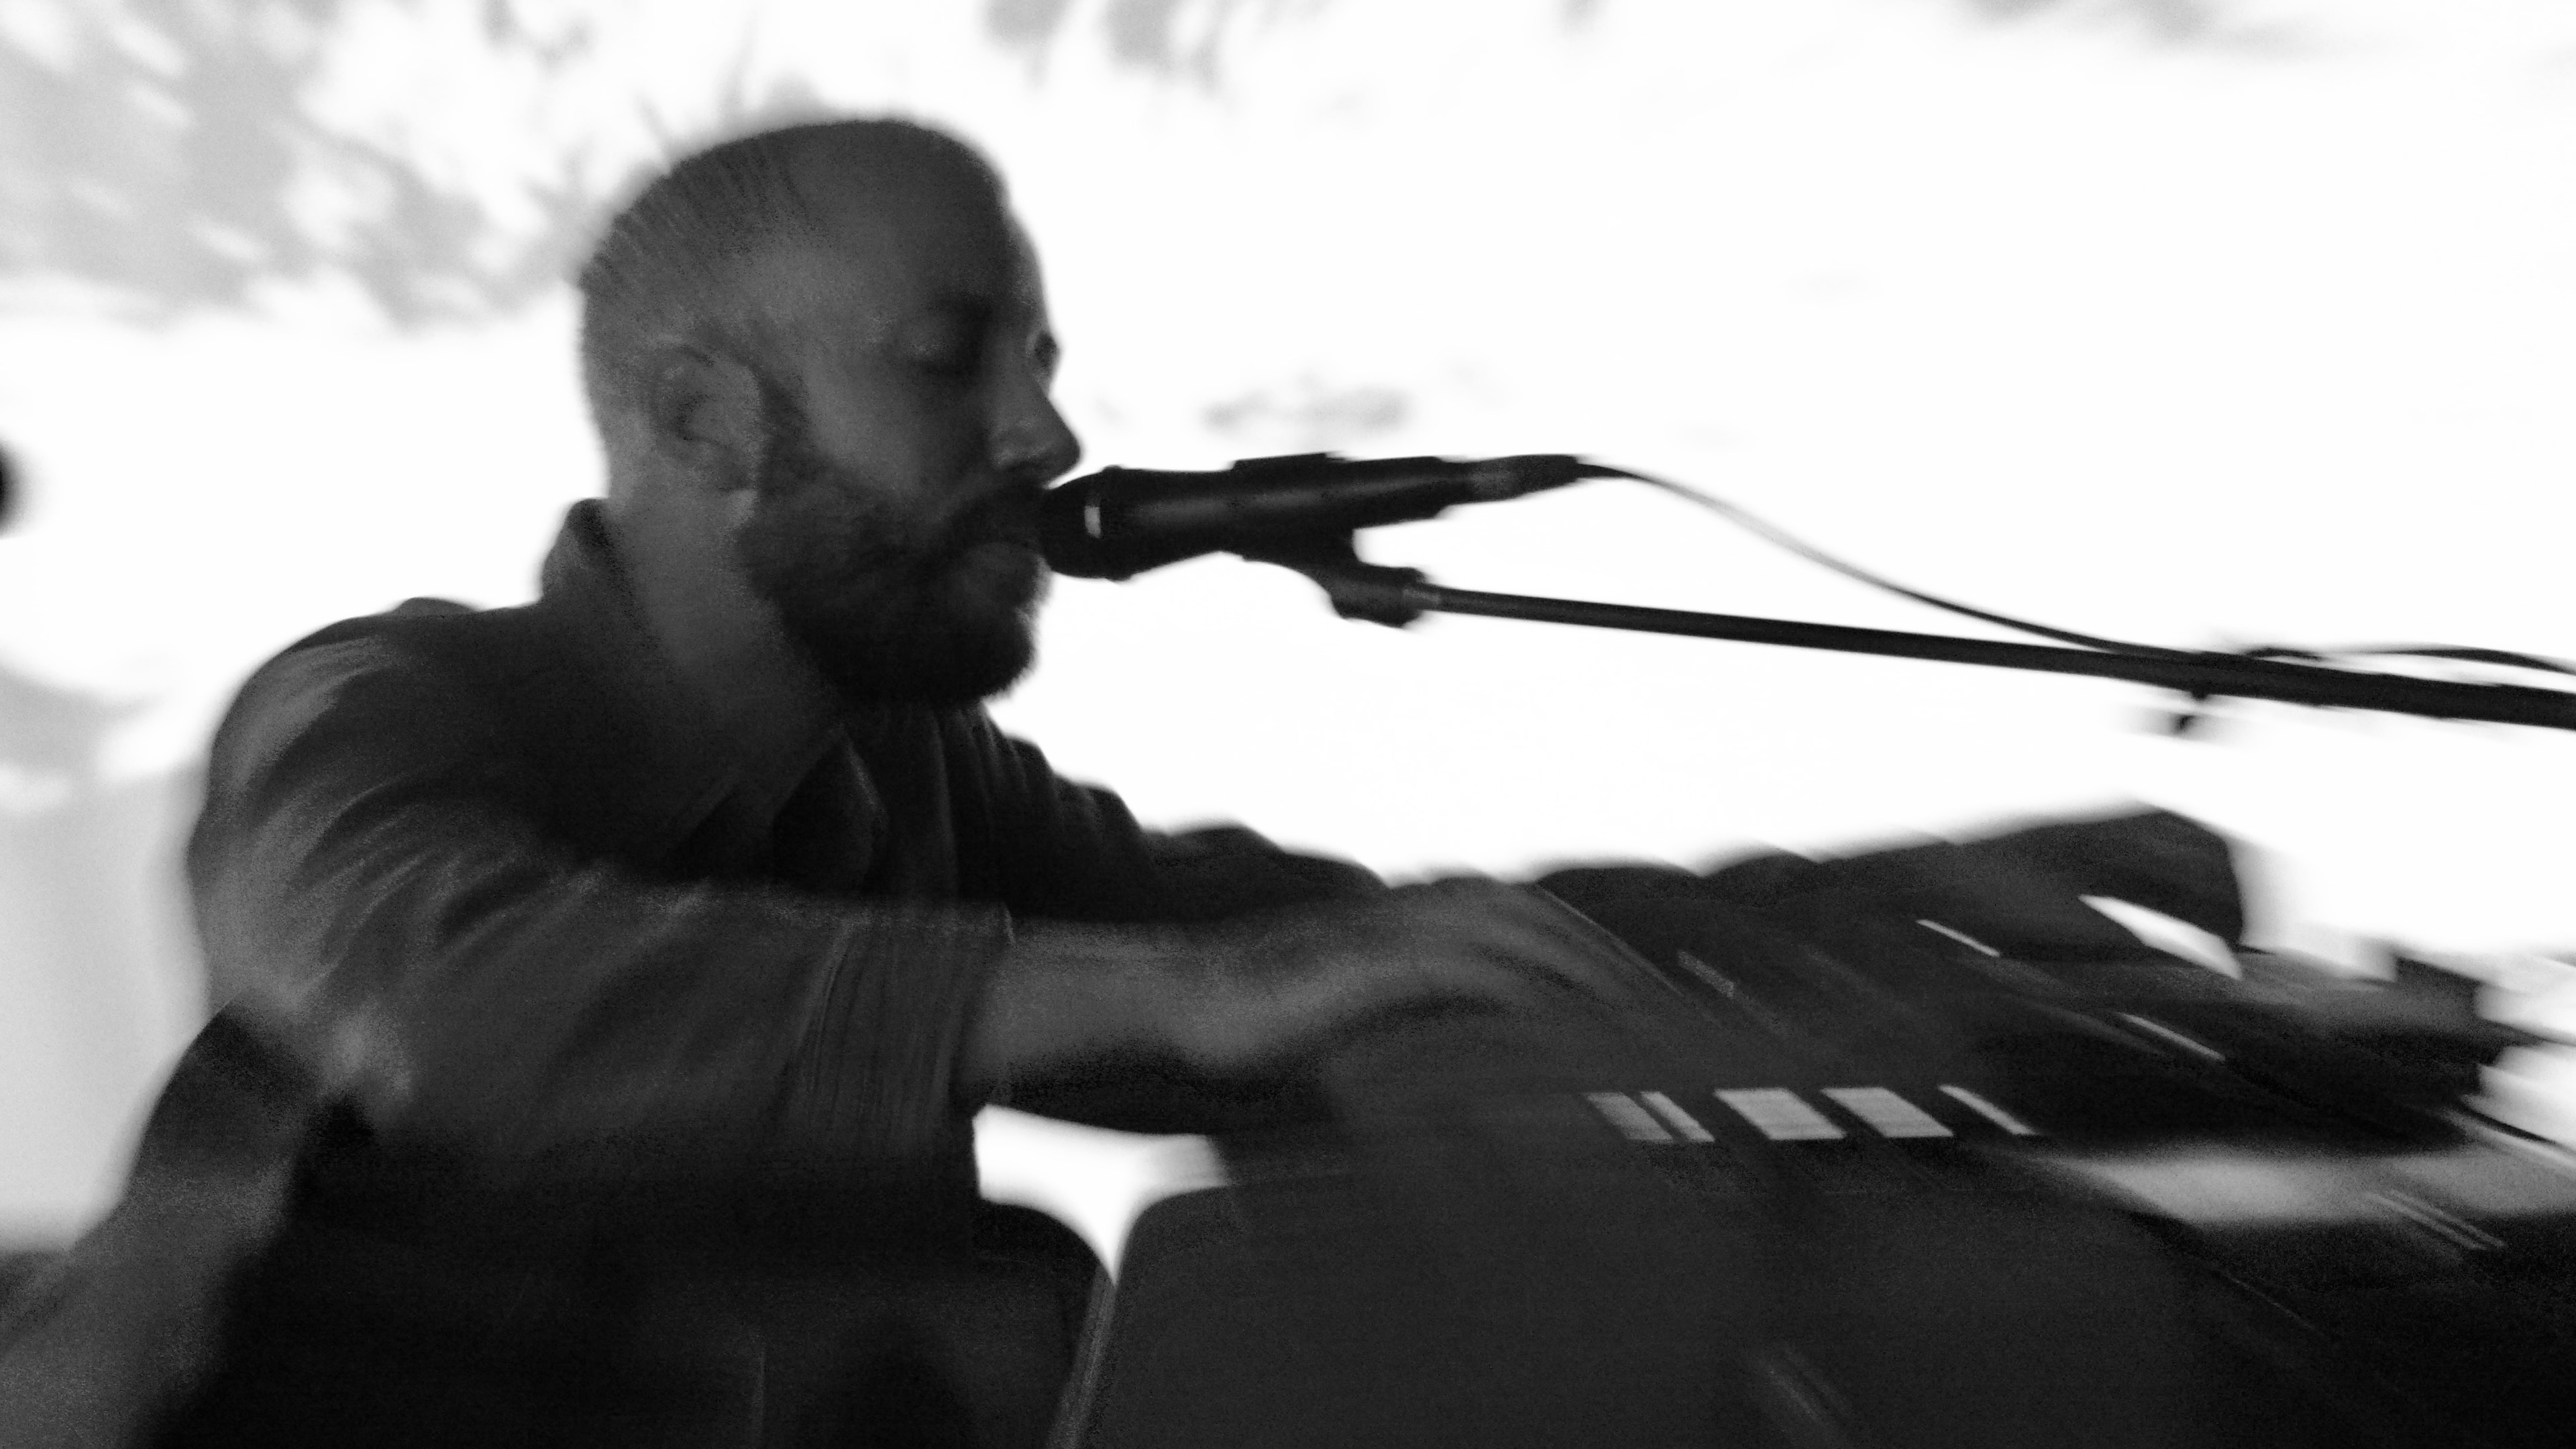 Musician in motion playing keyboard, blurred artistic effect captures dynamic performance